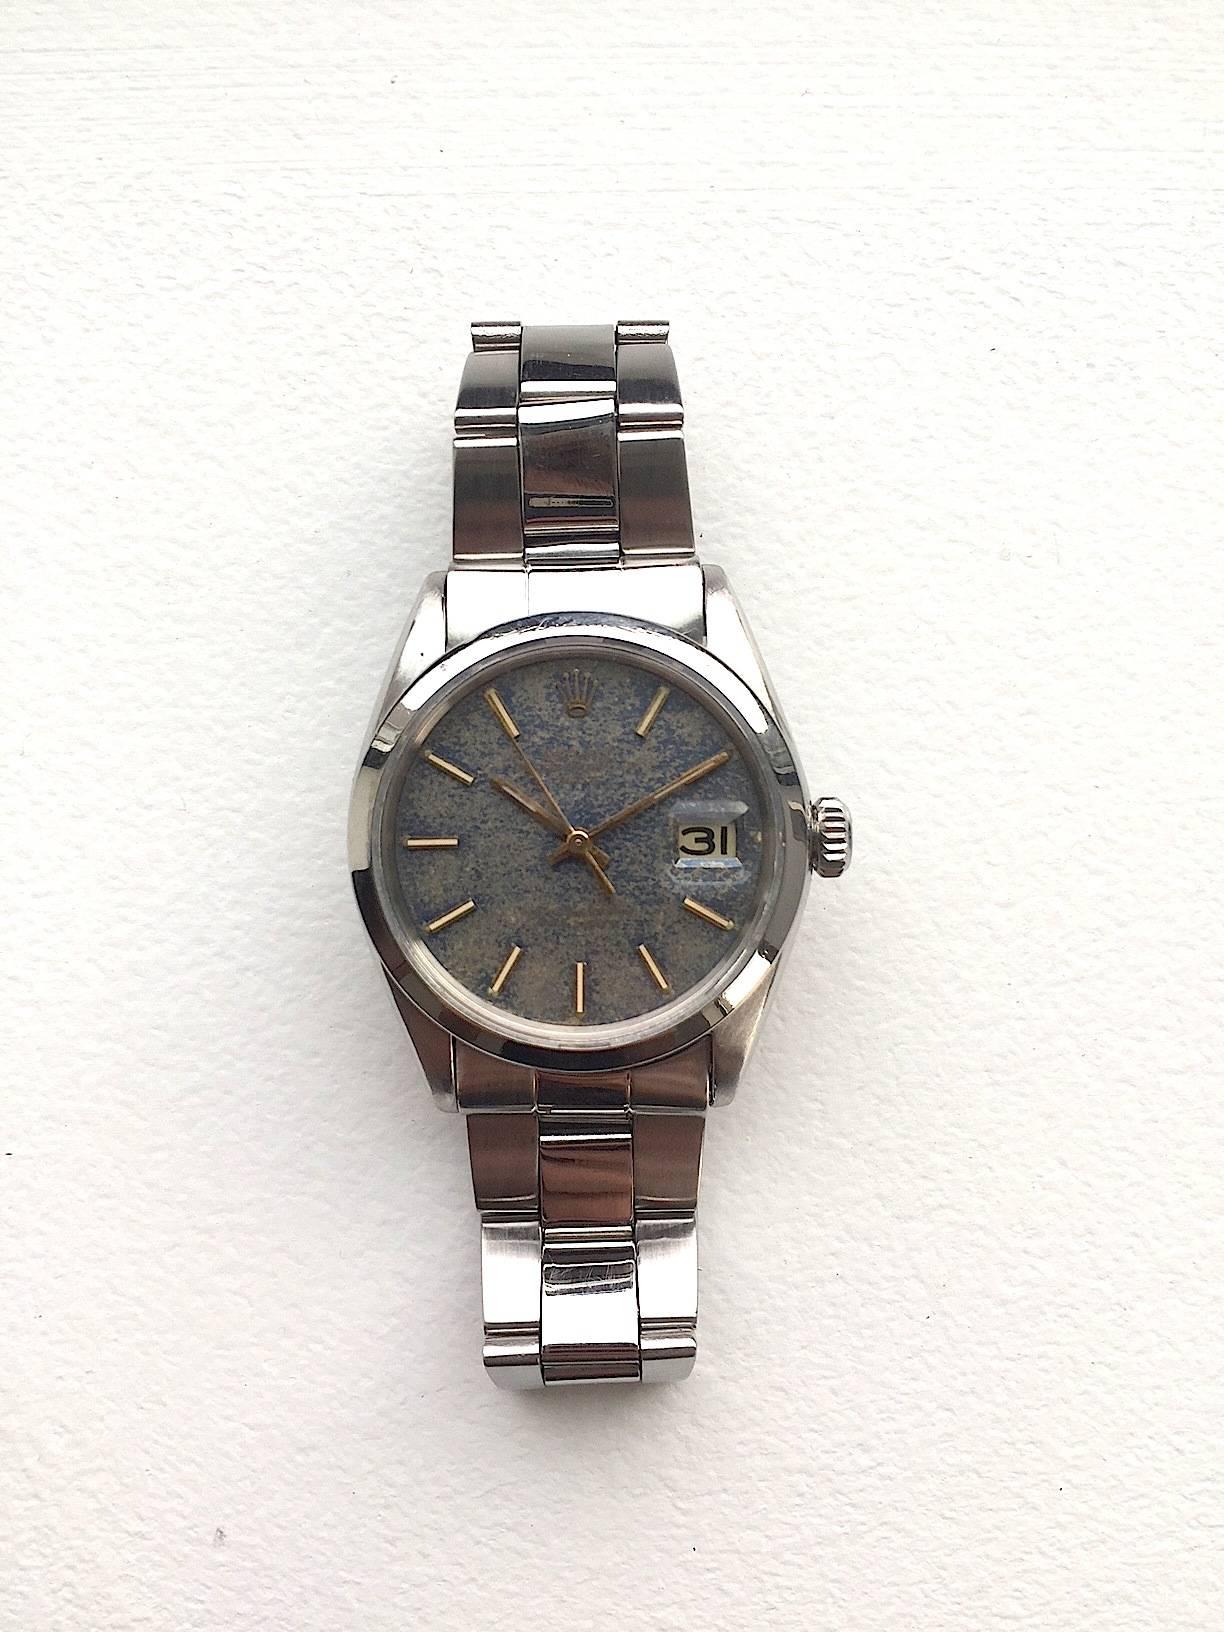 Rolex Stainless Steel Oyster Perpetual Date Watch
Rare One Of A Kind Blue Tropical Two Tone Dial with Yellow Applied Hour Markers and Matching Hands
Stainless Steel Smooth Bezel
Stainless Steel Case
34mm in size 
Features Rolex Automatic Movement